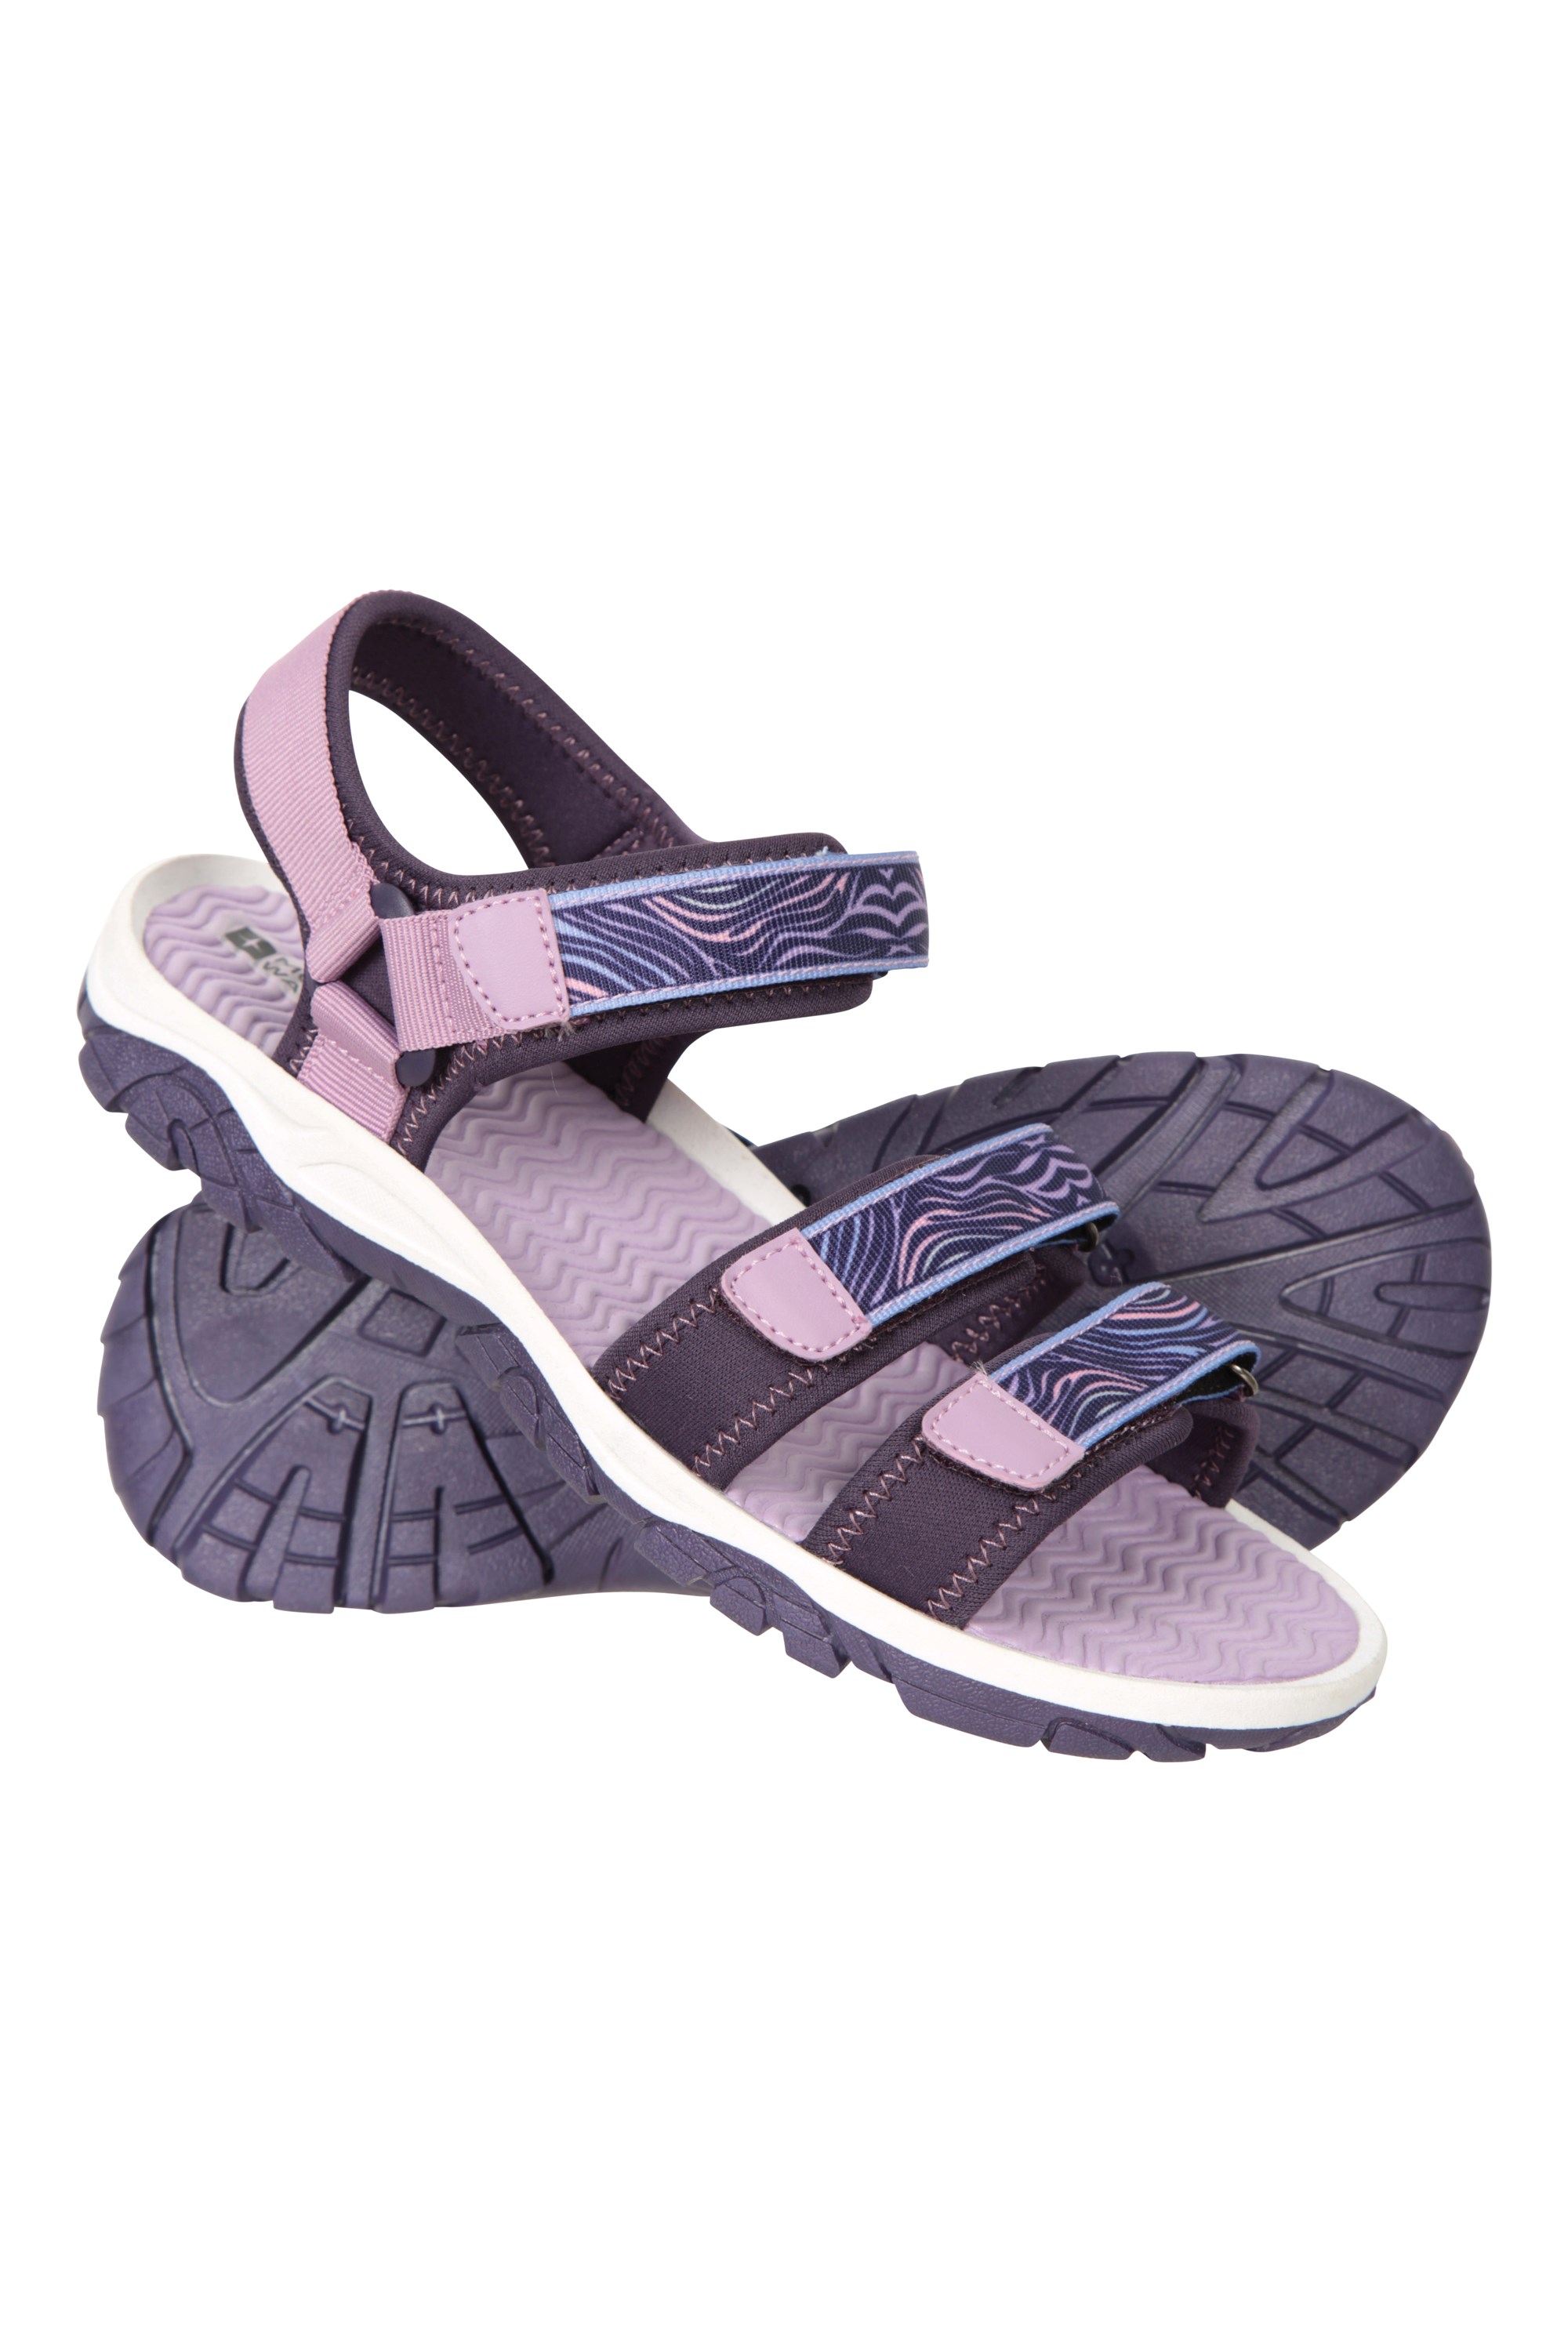 Sandals Flip Flops By Rampage Size: 7.5 – Clothes Mentor Sylvania OH #127